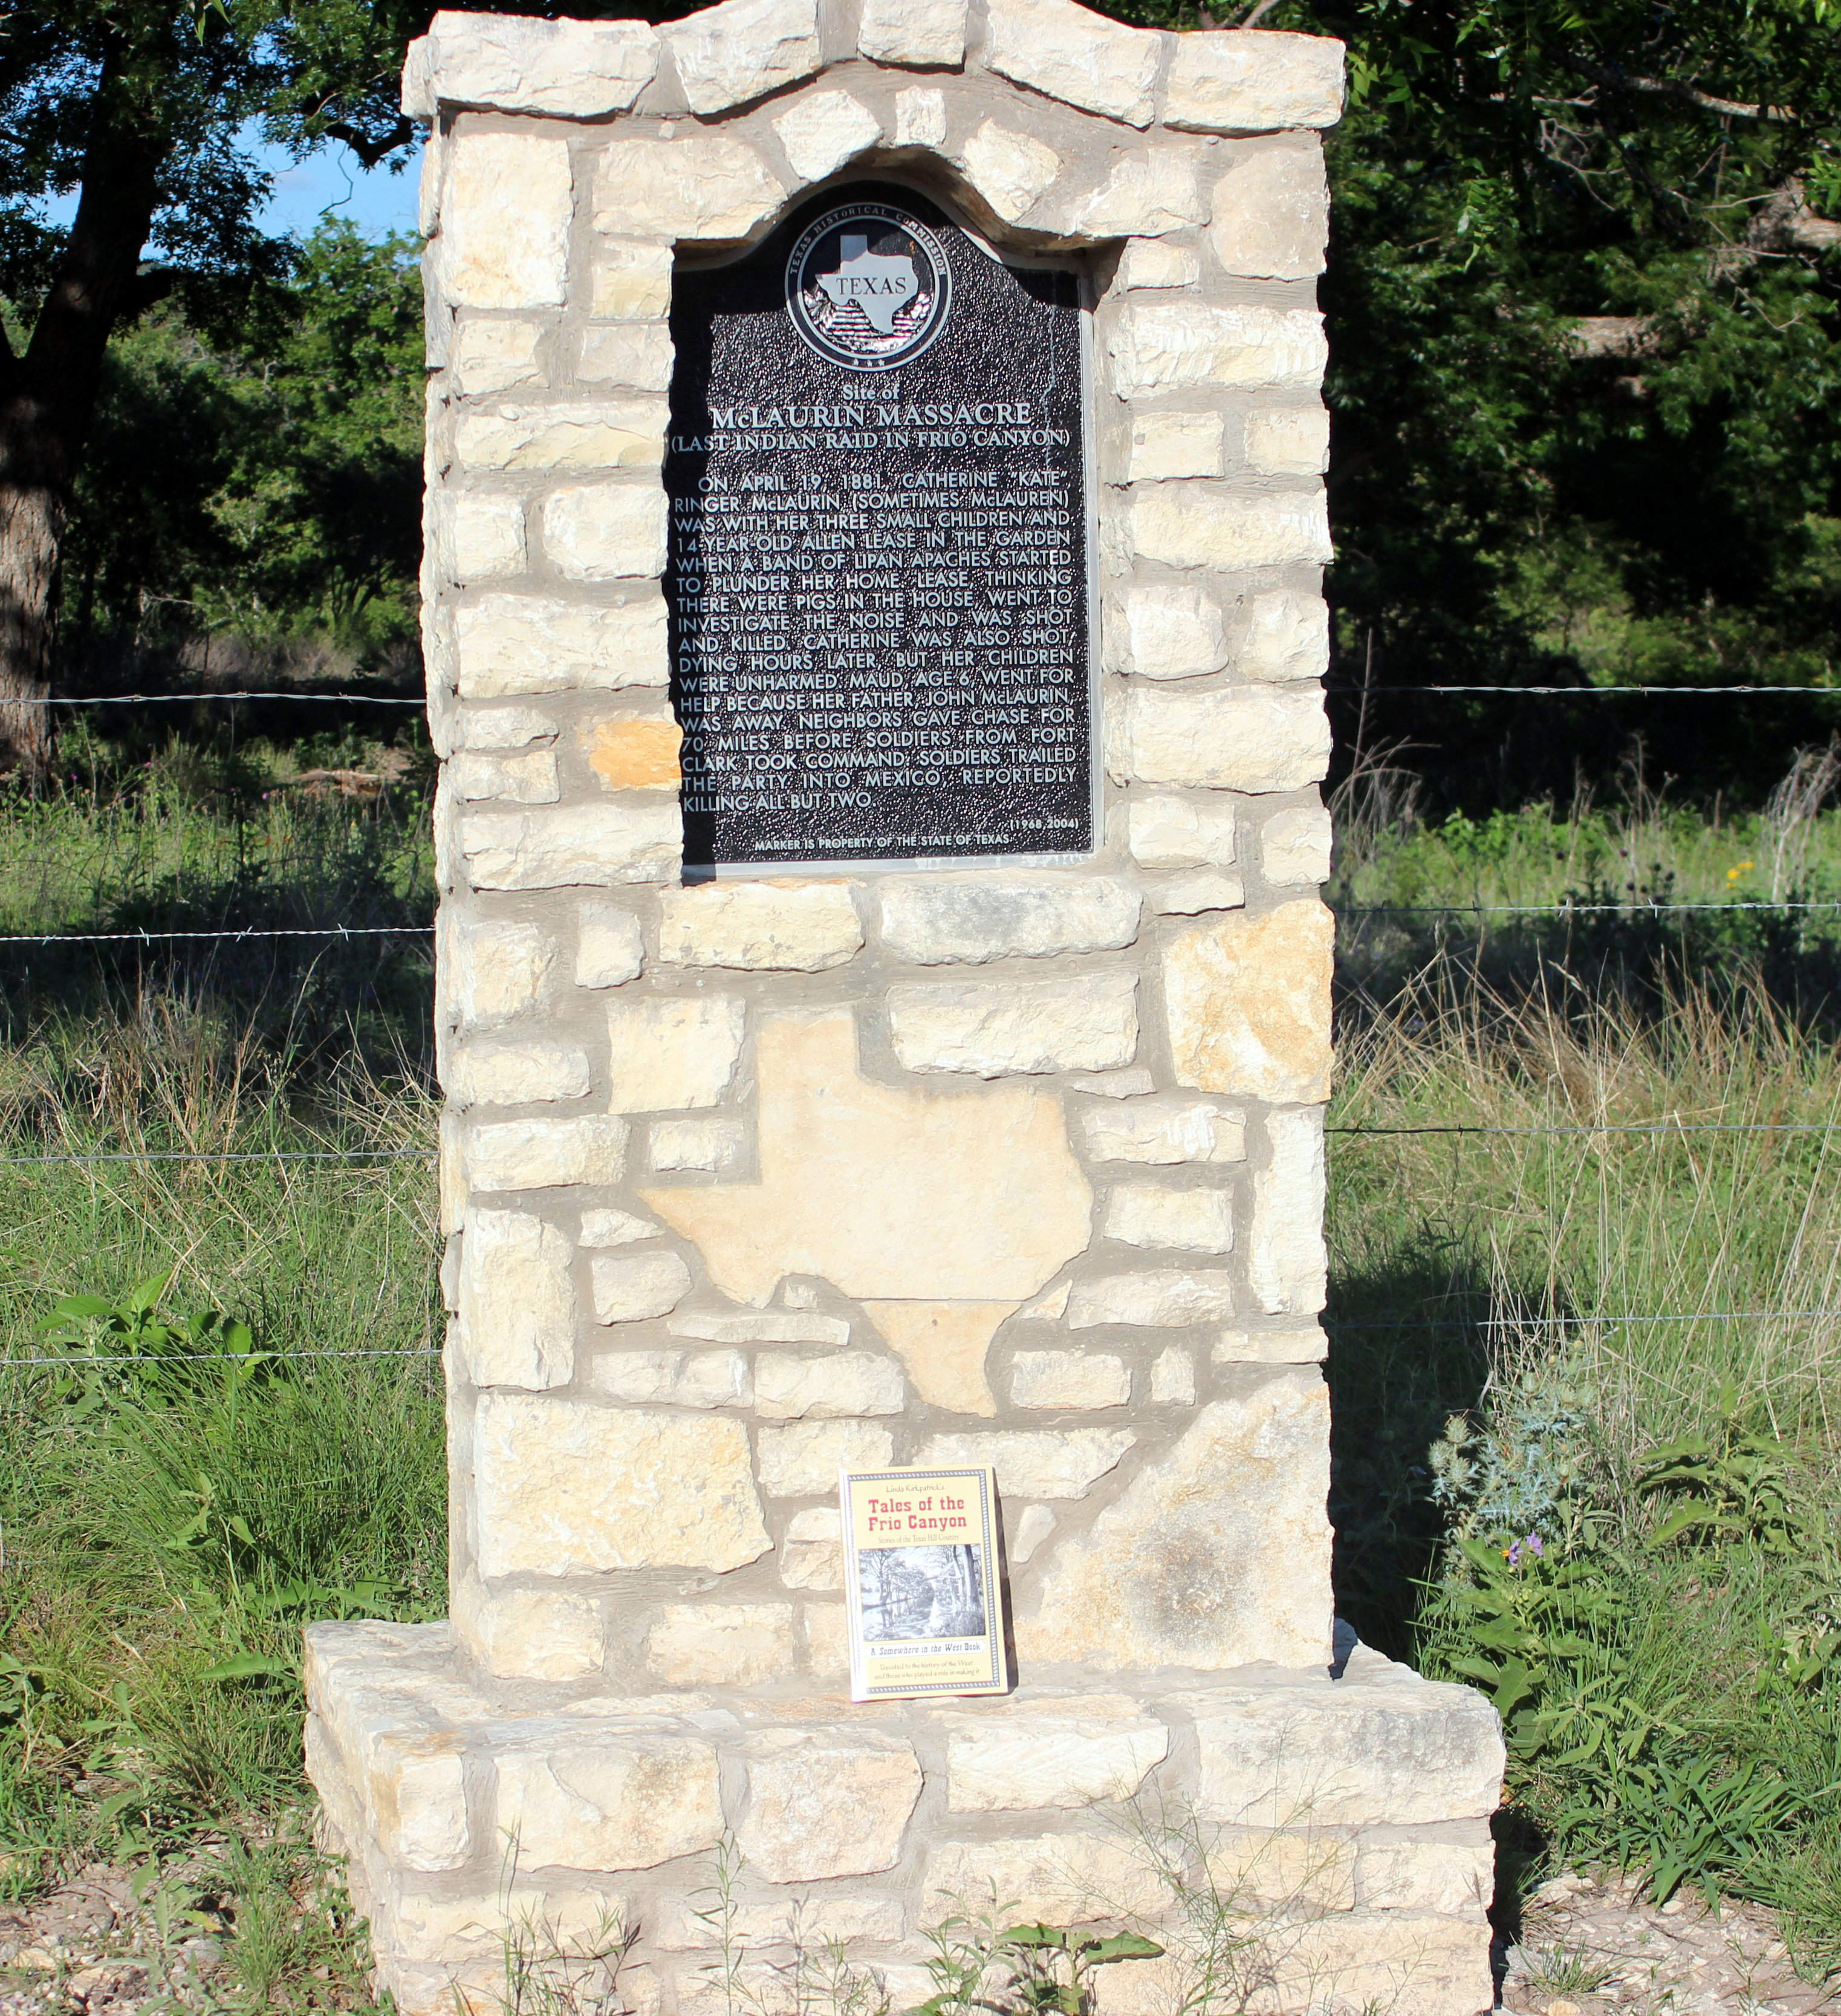 McLaurin Massacre Historical Marker and A. J. Sowells’ book Early Settlers and Indian Fighters of Southwest Texas